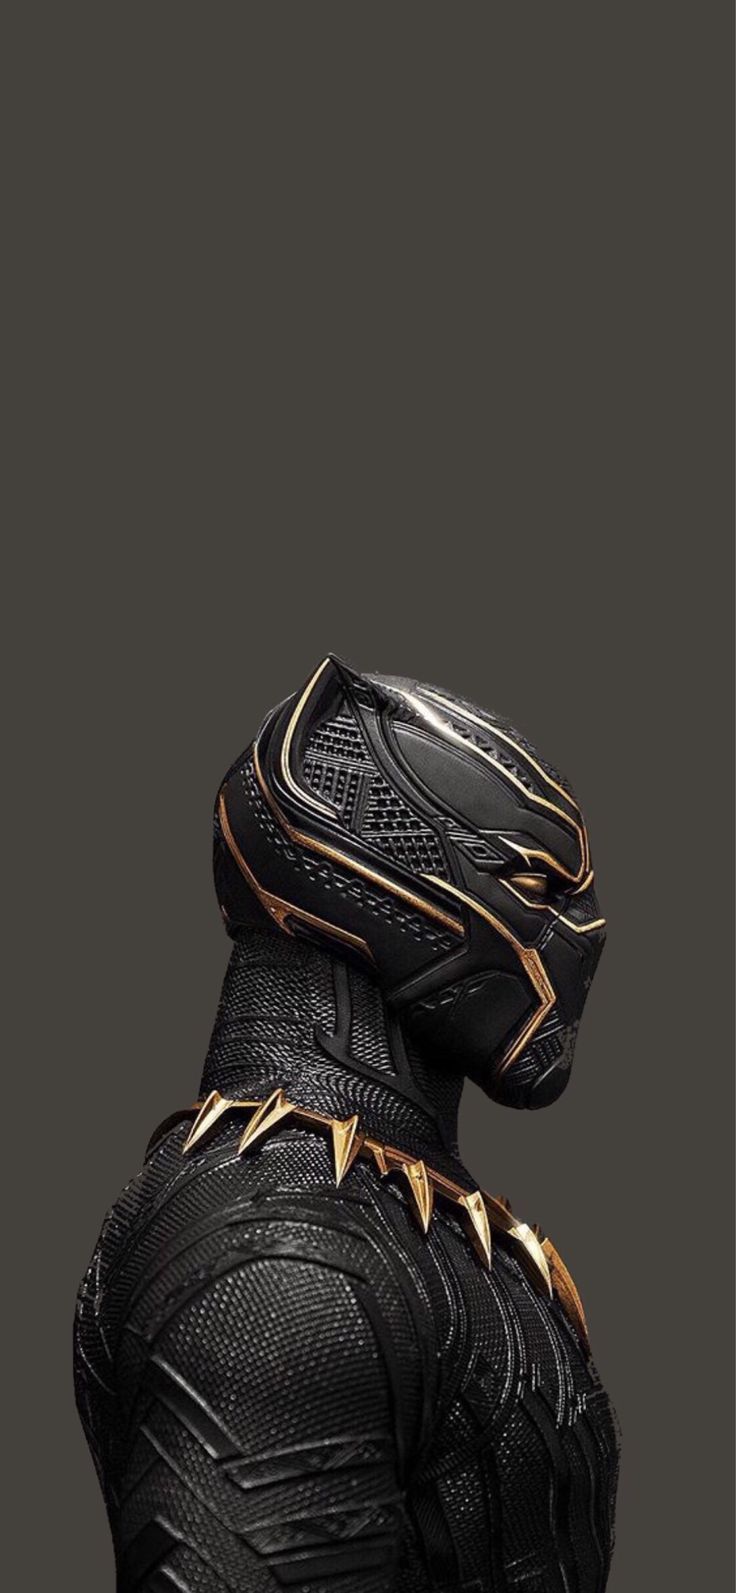 Black panther HD wallpaper background mobile iphone and Android Desktop of Ap. Black panther HD wallpaper, Black panther art, Black panther marvel